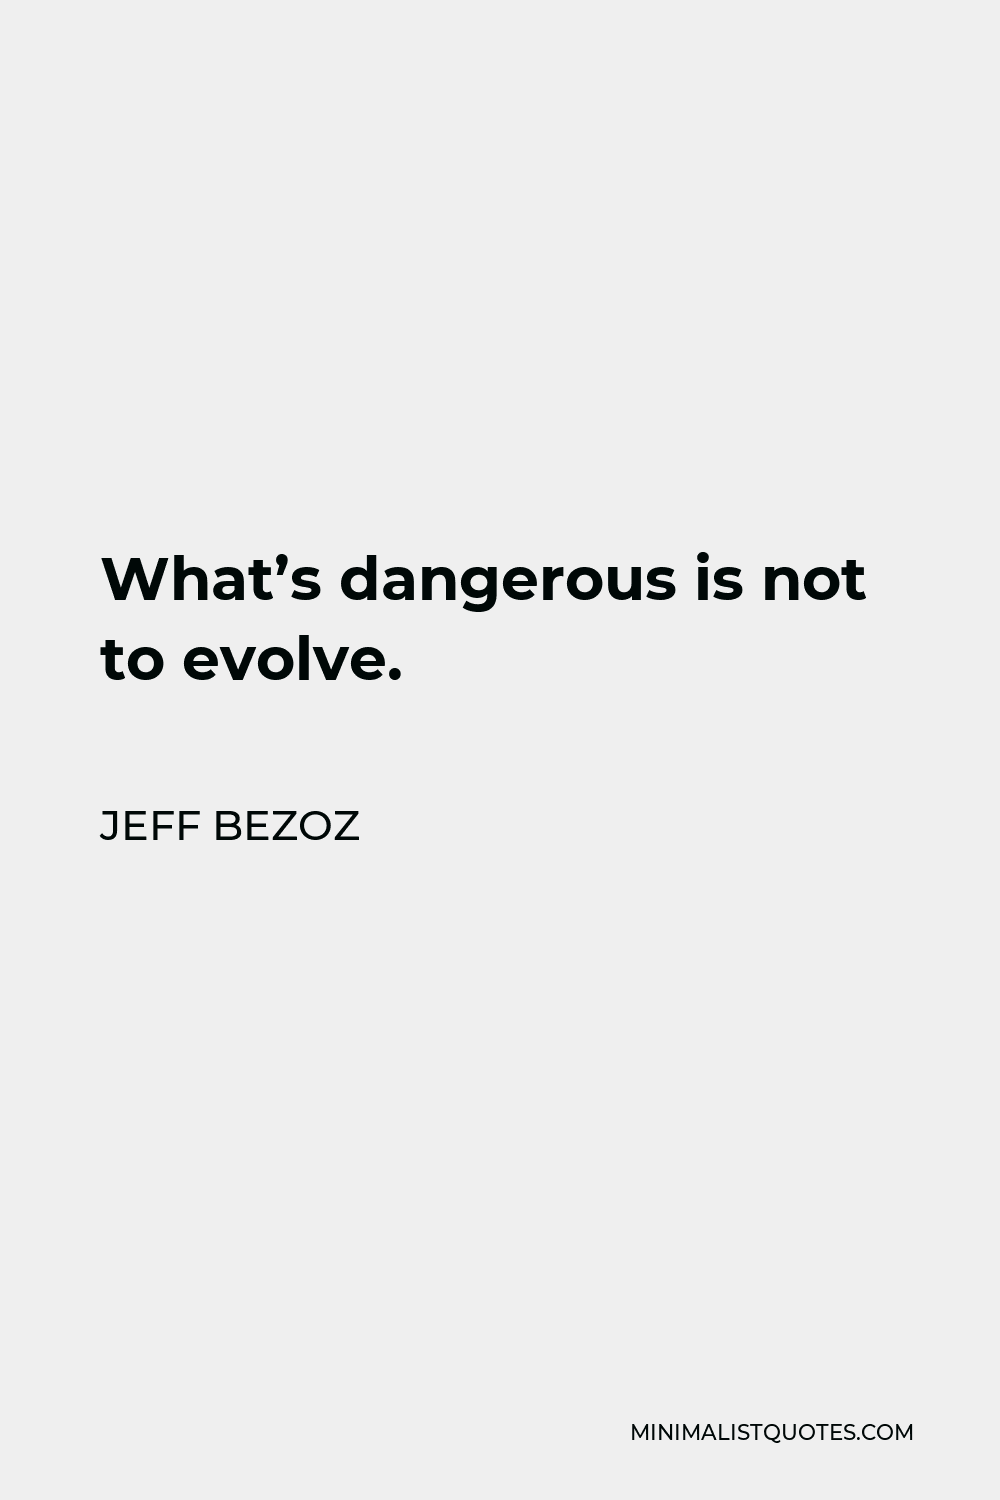 Jeff Bezoz Quote - What’s dangerous is not to evolve.